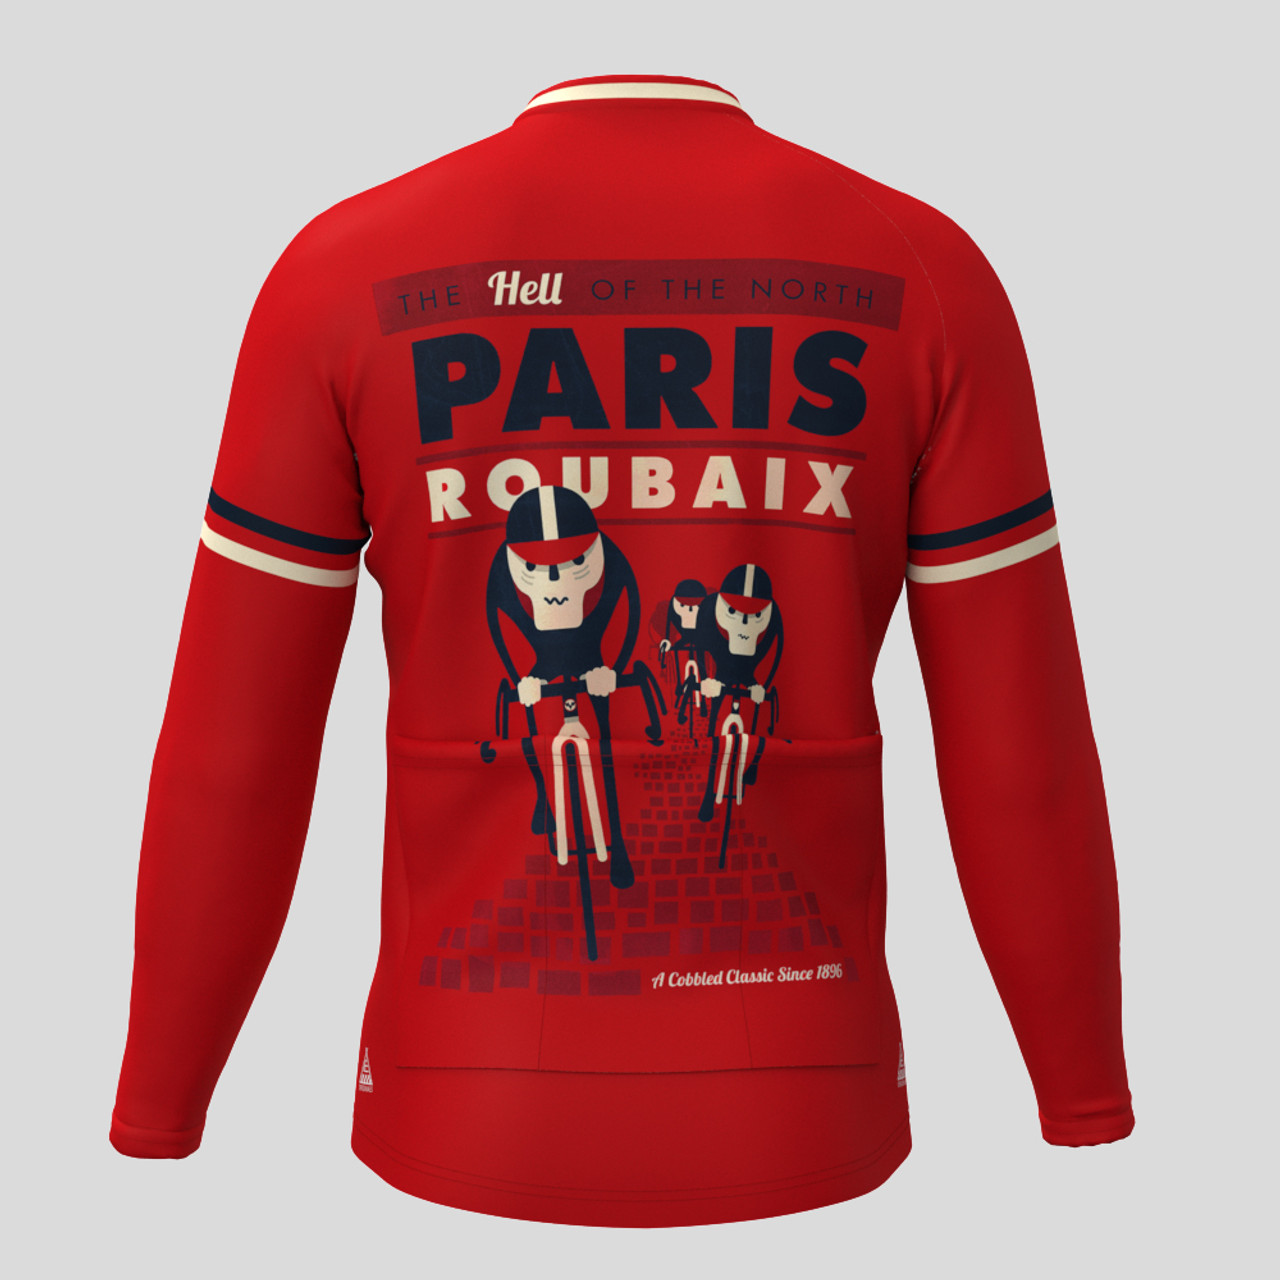 Paris Roubaix the Hell of the North Men's LS Cycling Jersey